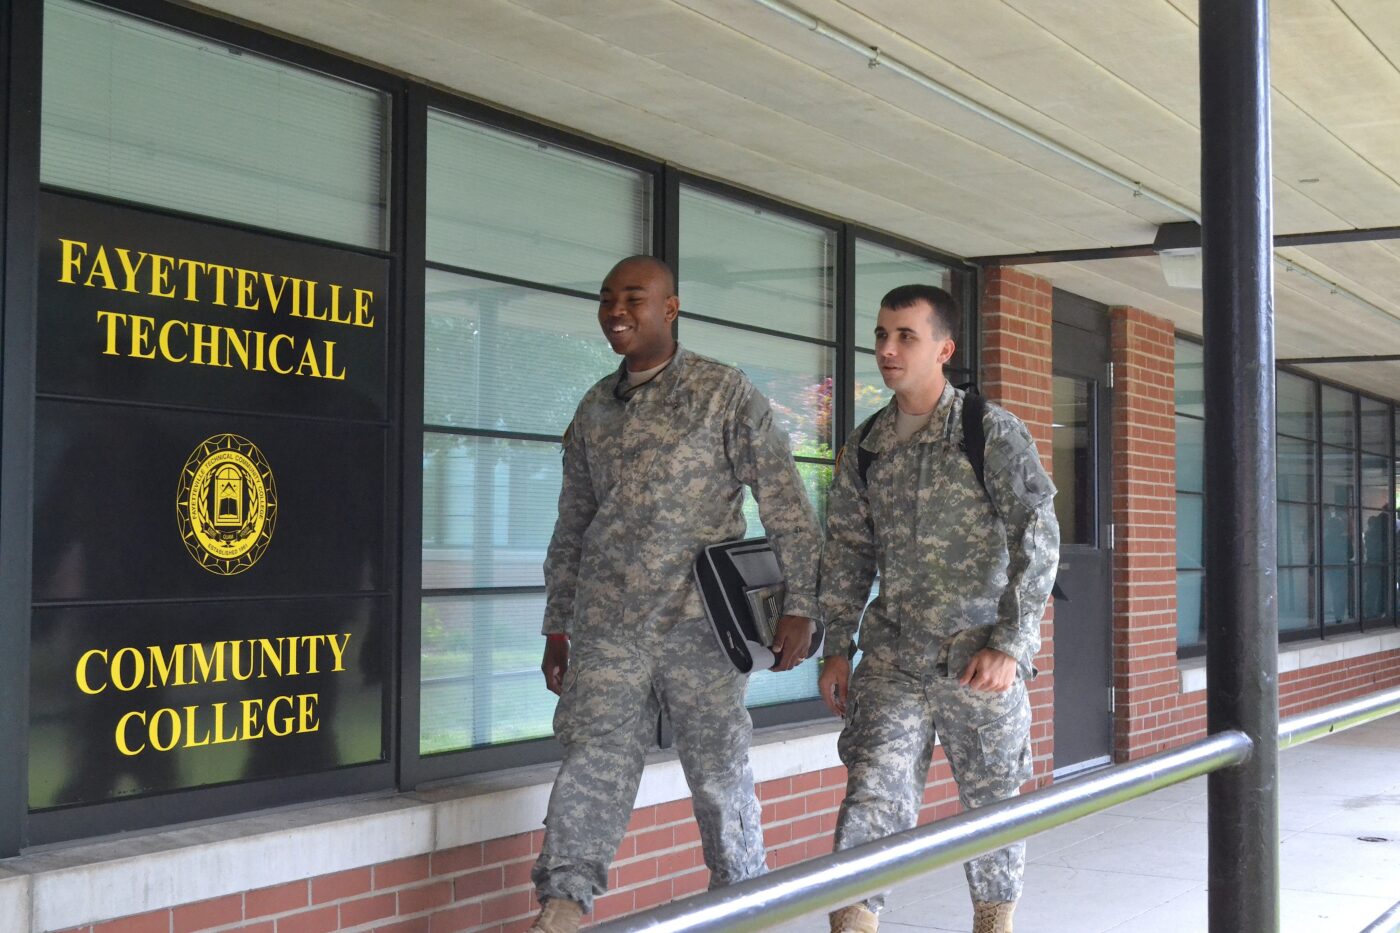 Two men dressed in military uniforms walk in front of a Fayetteville Tech building.